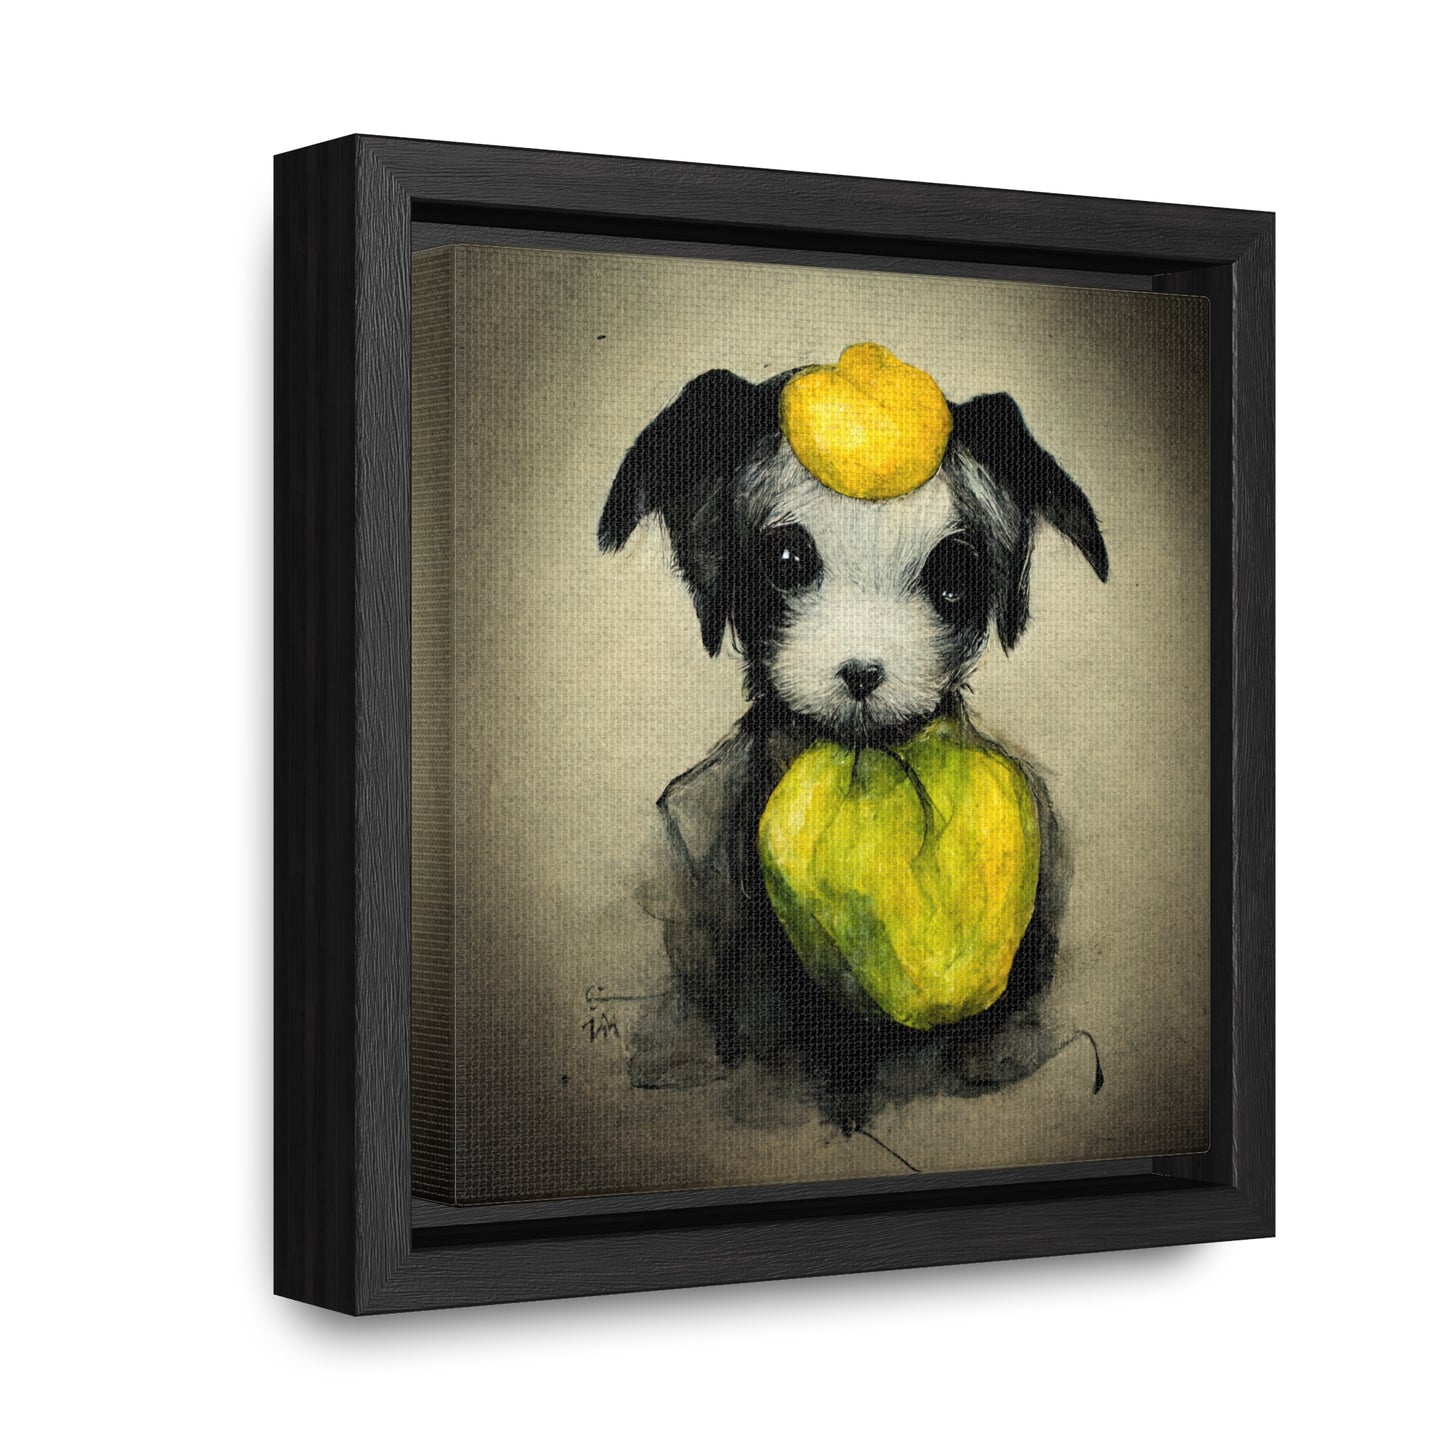 Dogs and Puppies 3, Valentinii, Gallery Canvas Wraps, Square Frame